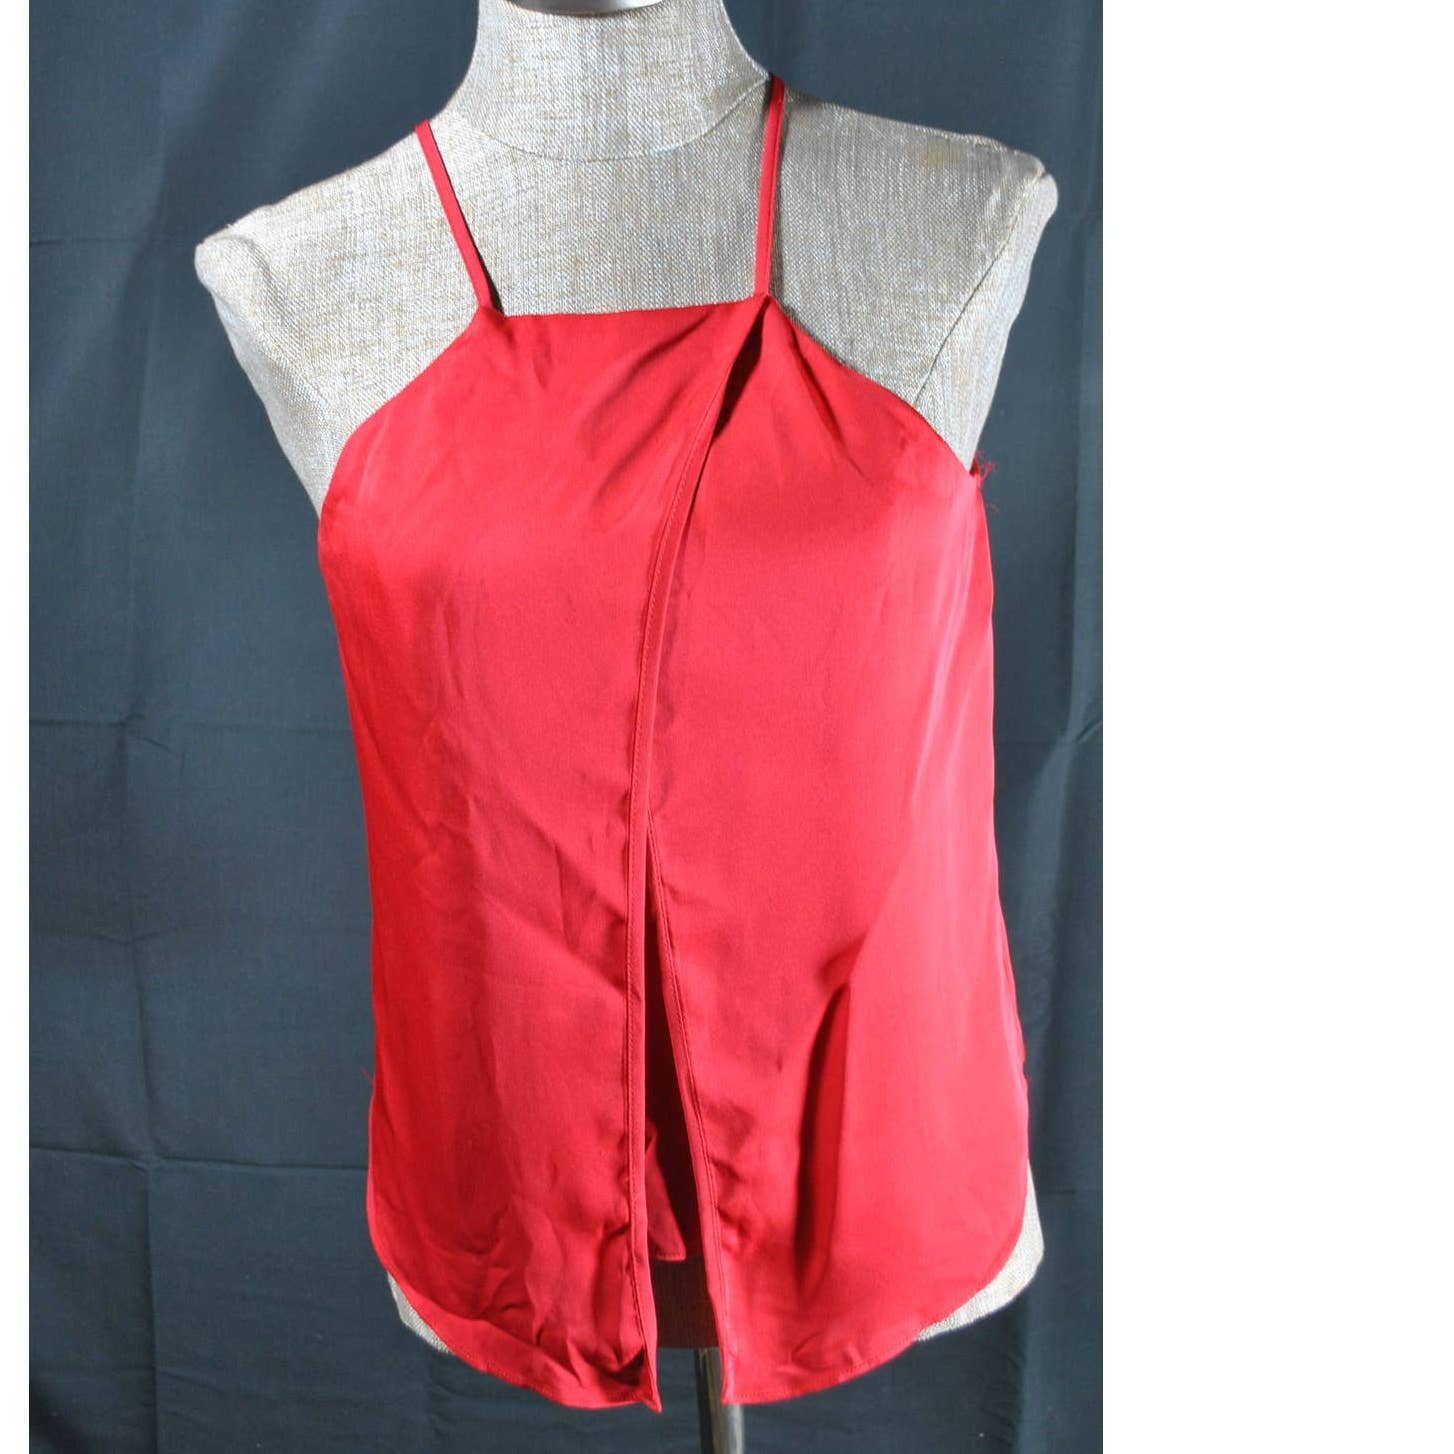 Milly Red Open Front Silk Top - 4